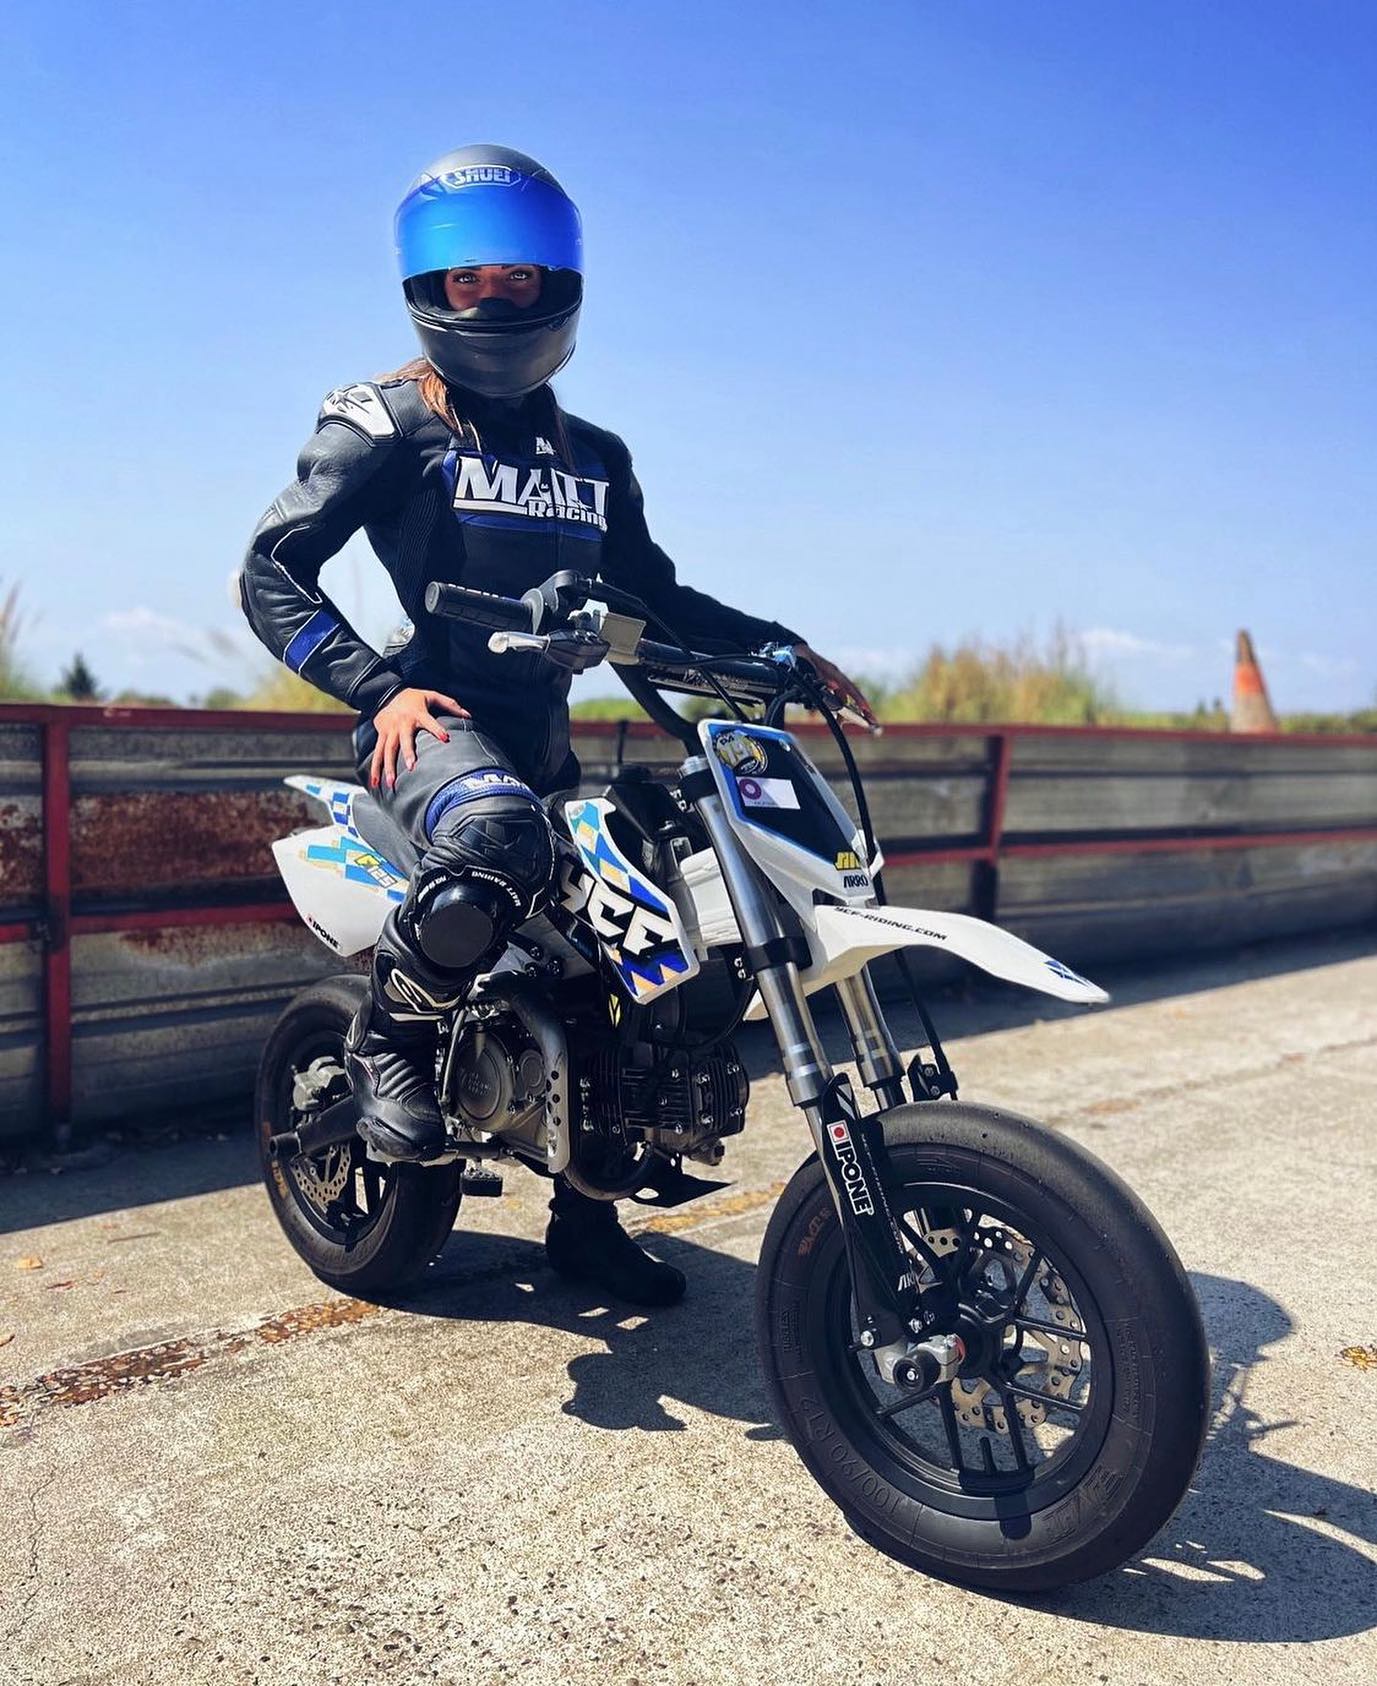 FRIDAY 🙌
It's time for the weekend!
@ivani_rideuse
—
#ycf #supermoto #moto #motorcycle